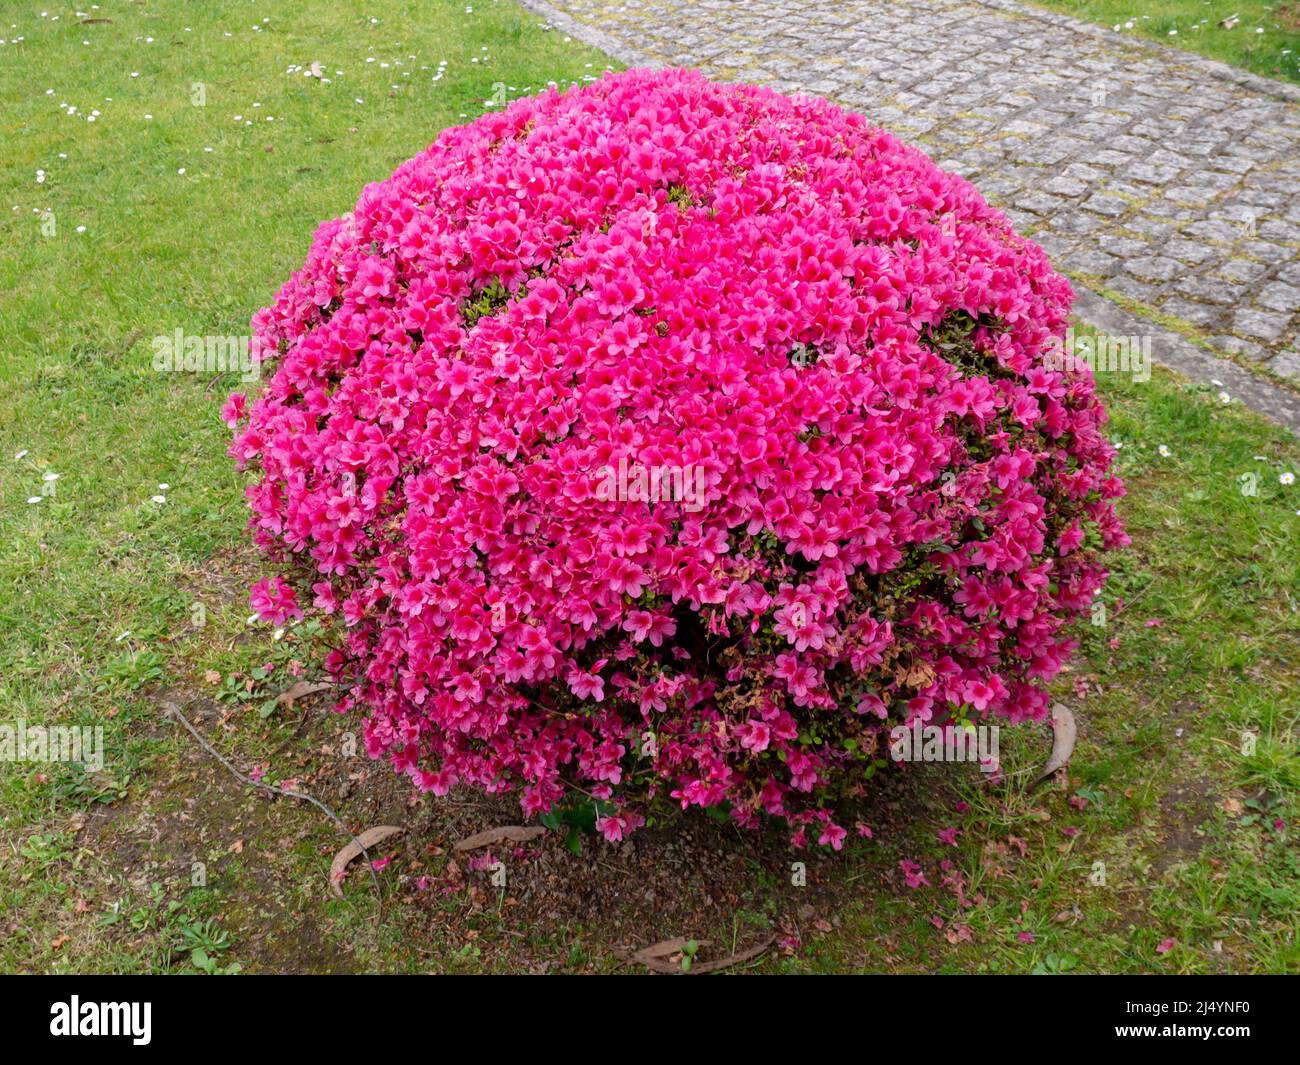 Azalea globe form pruned plant covered with bright pink flowers in the garden. Rhododendron tsutsusi. Stock Photo